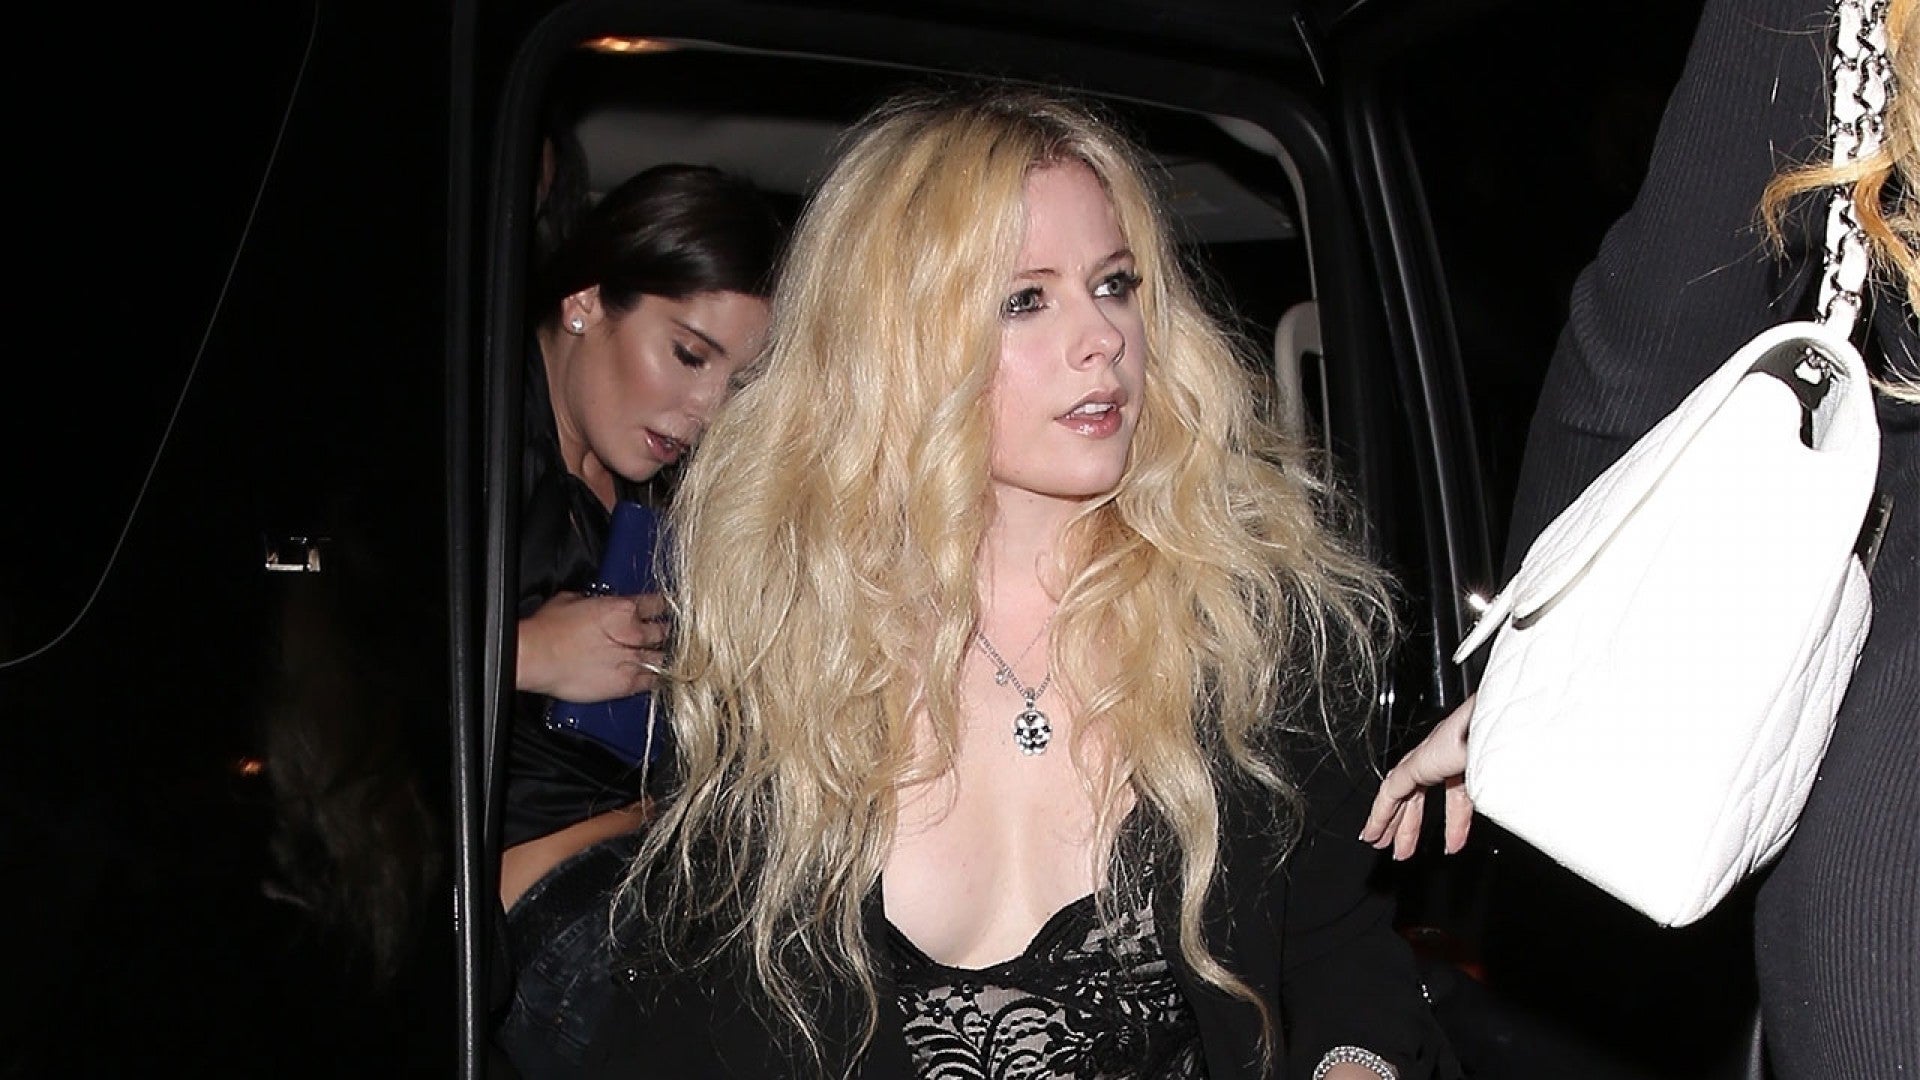 Avril Lavigne Celebrates Her 33rd Birthday In Racy Lacy Number Entertainment Tonight